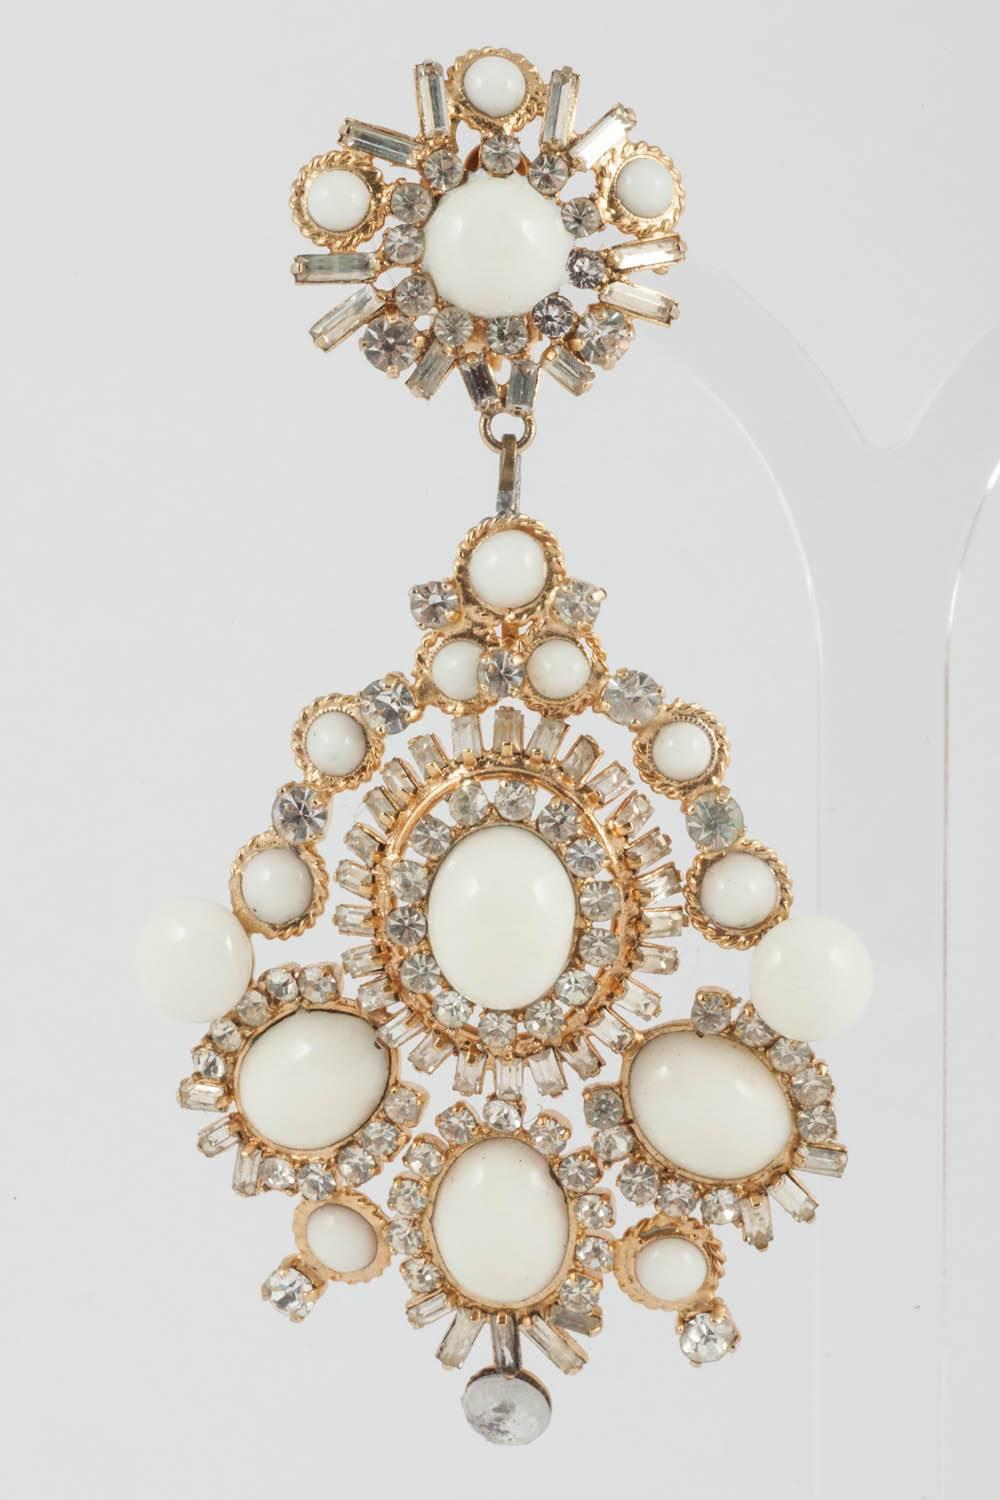 Handmade from ivory coloured poured glass, clear pastes, all set in gilded metal,truly artisanal and highly characteristic by Maison Gripoix in Paris in the 1960s, these are true 'bijou de la haute couture', and would have been made specifically for